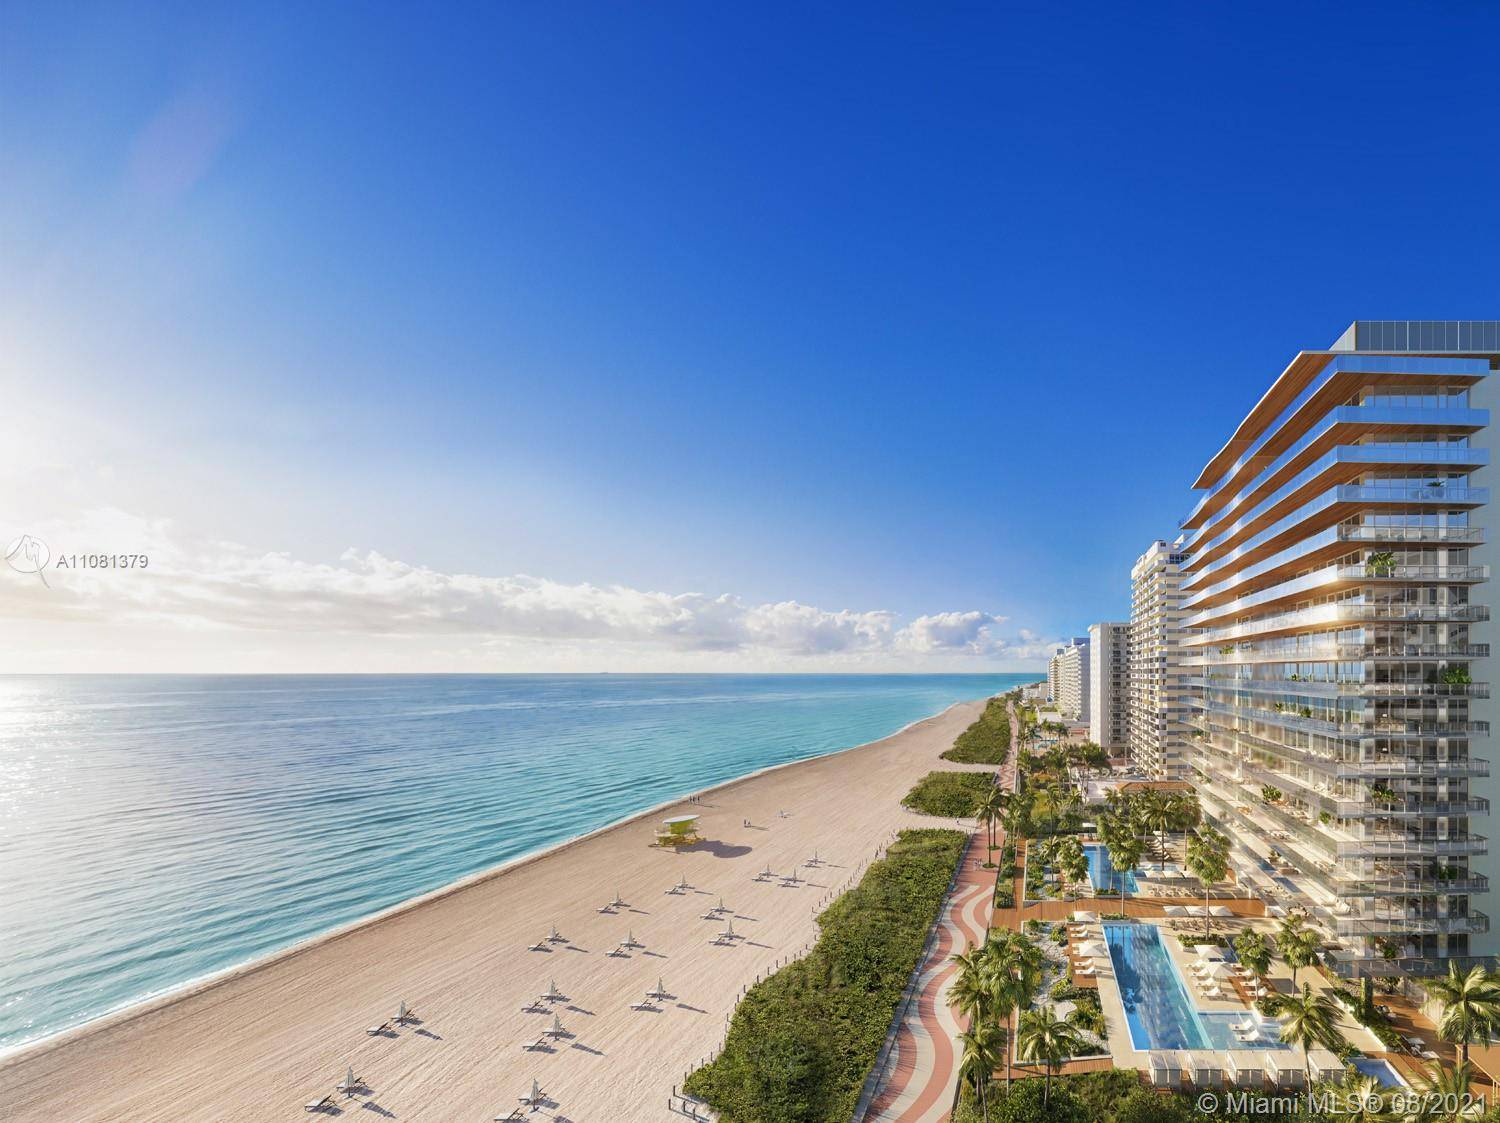 A heaven for quality time and tranquility, 57 Ocean is comprised of ocean front residences that share a privileged gaze over the sand of iconic Millionaire's Row, Miami Beach's most ...